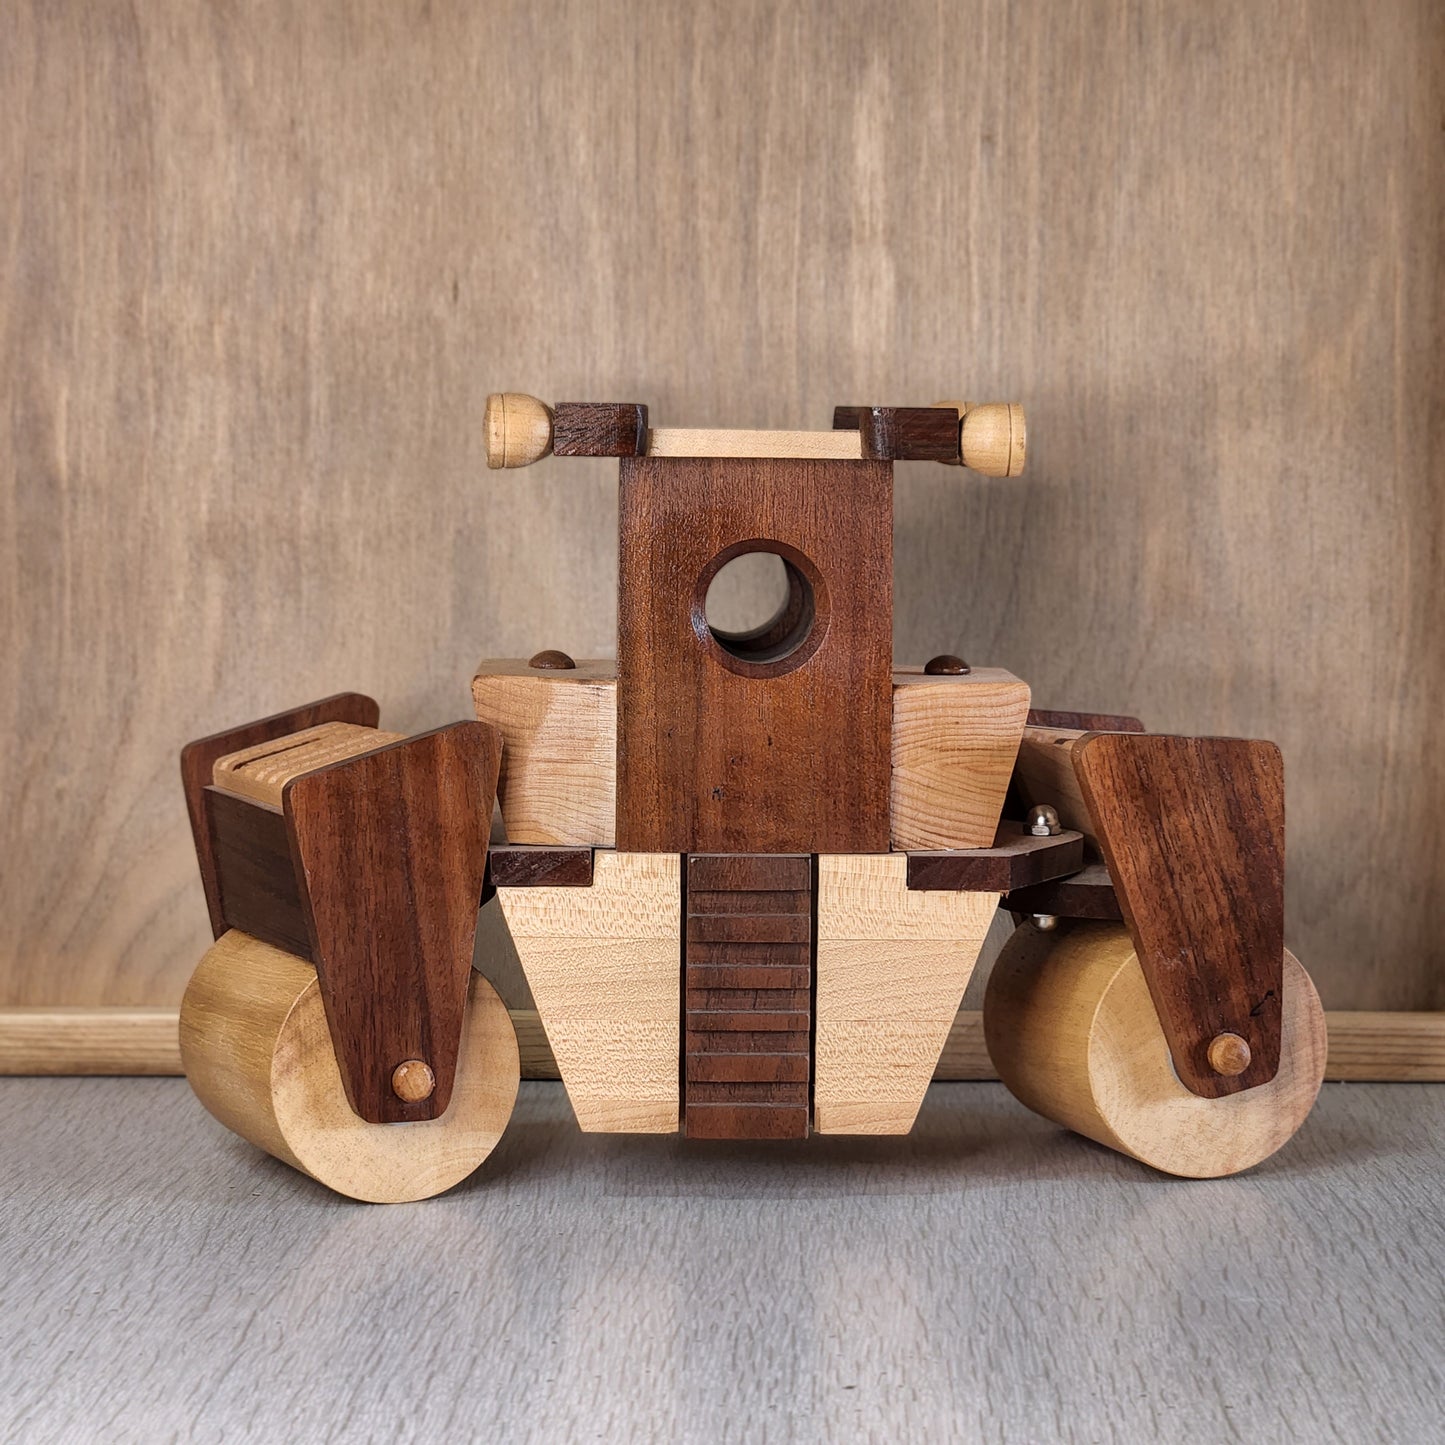 Wooden Toys/Displays - Variety